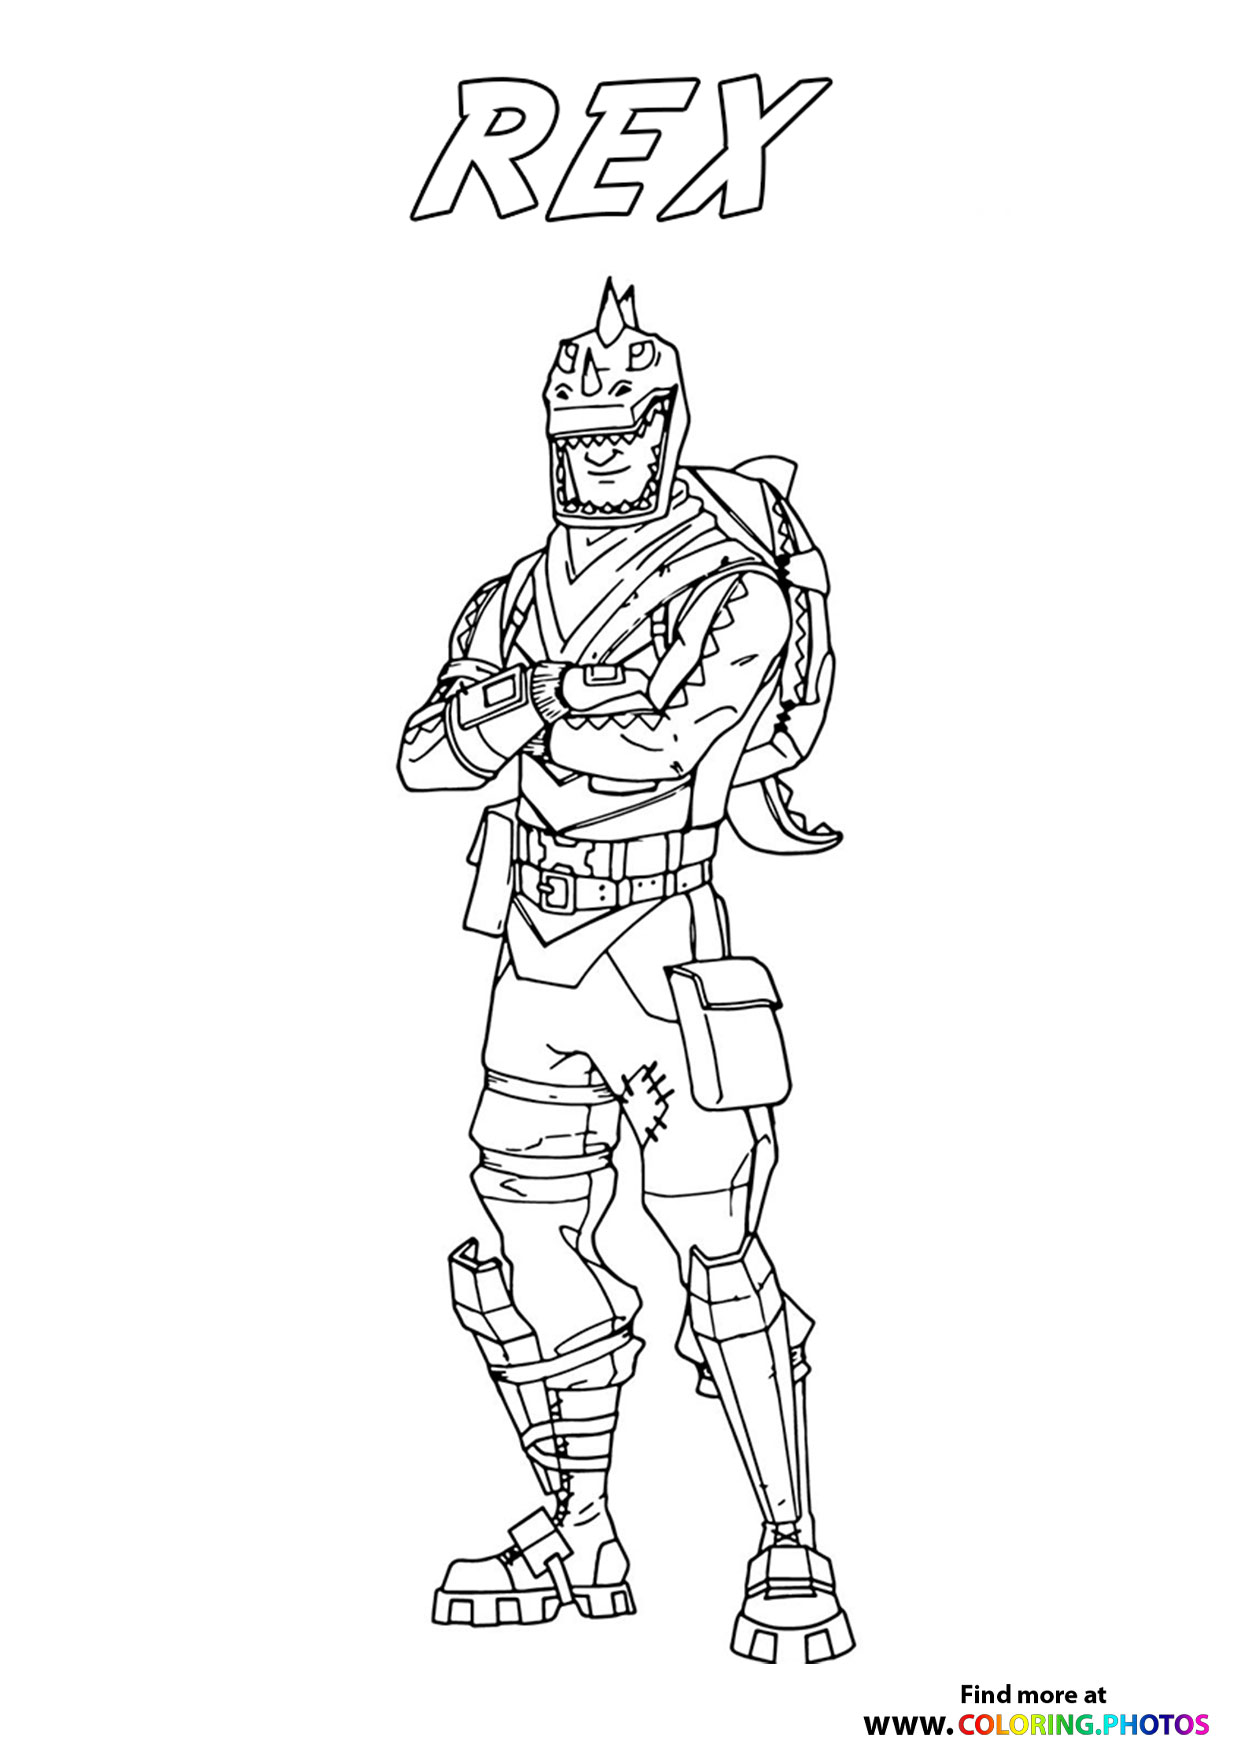 Rex   Fortnite   Coloring Pages for kids